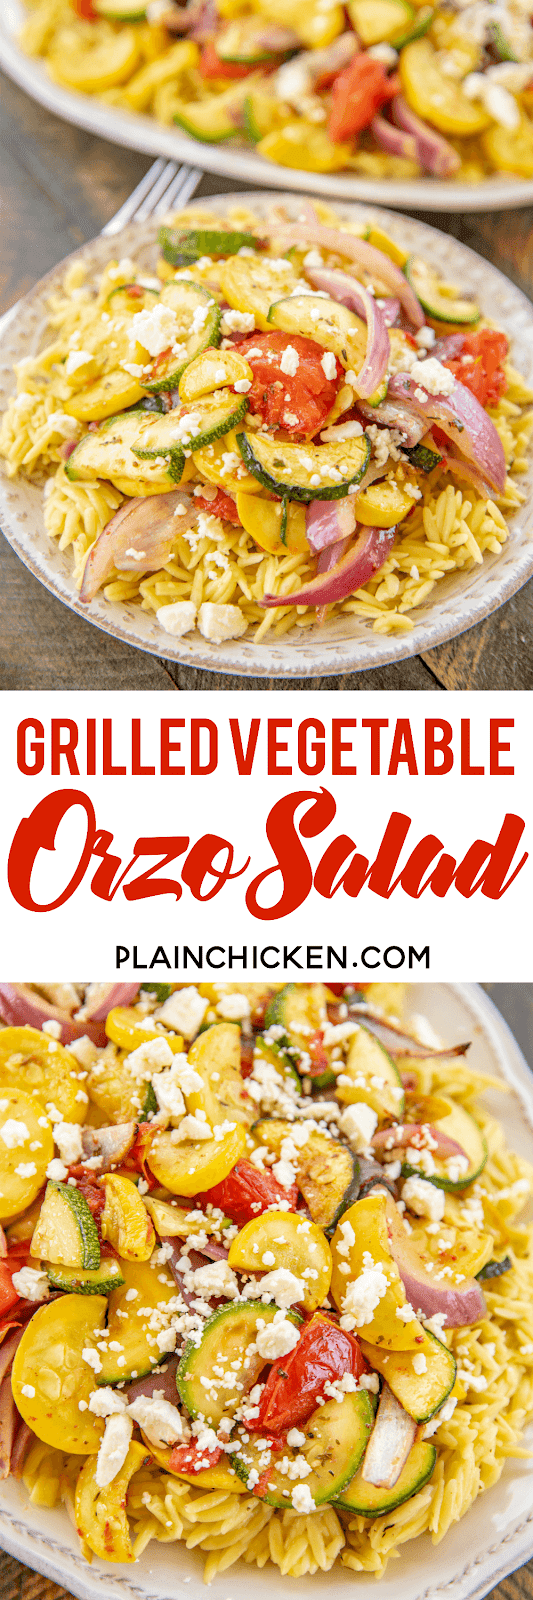 Grilled Vegetable Orzo Salad | Plain Chicken®